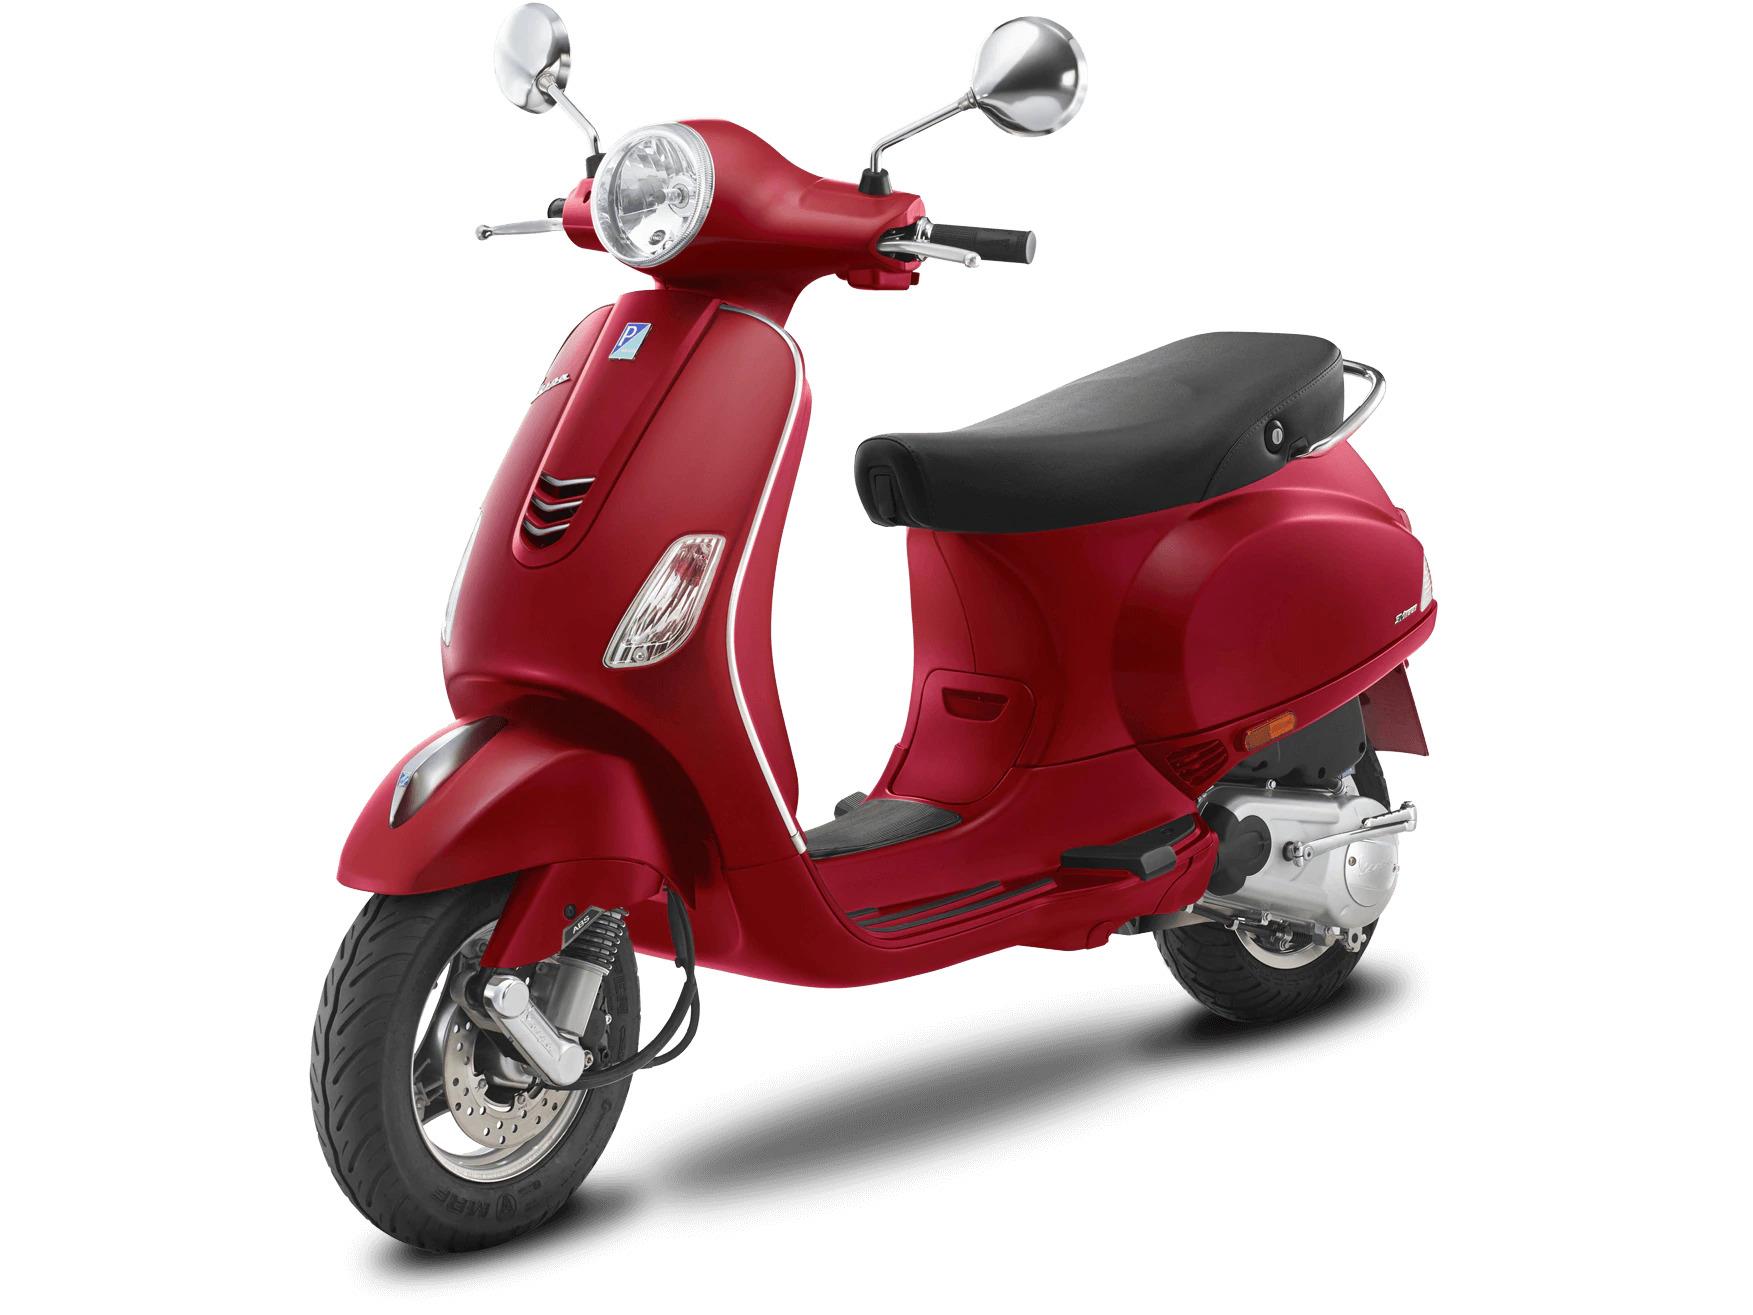 New Vespa ZX 125 BS6 Price in India [Full Specifications]